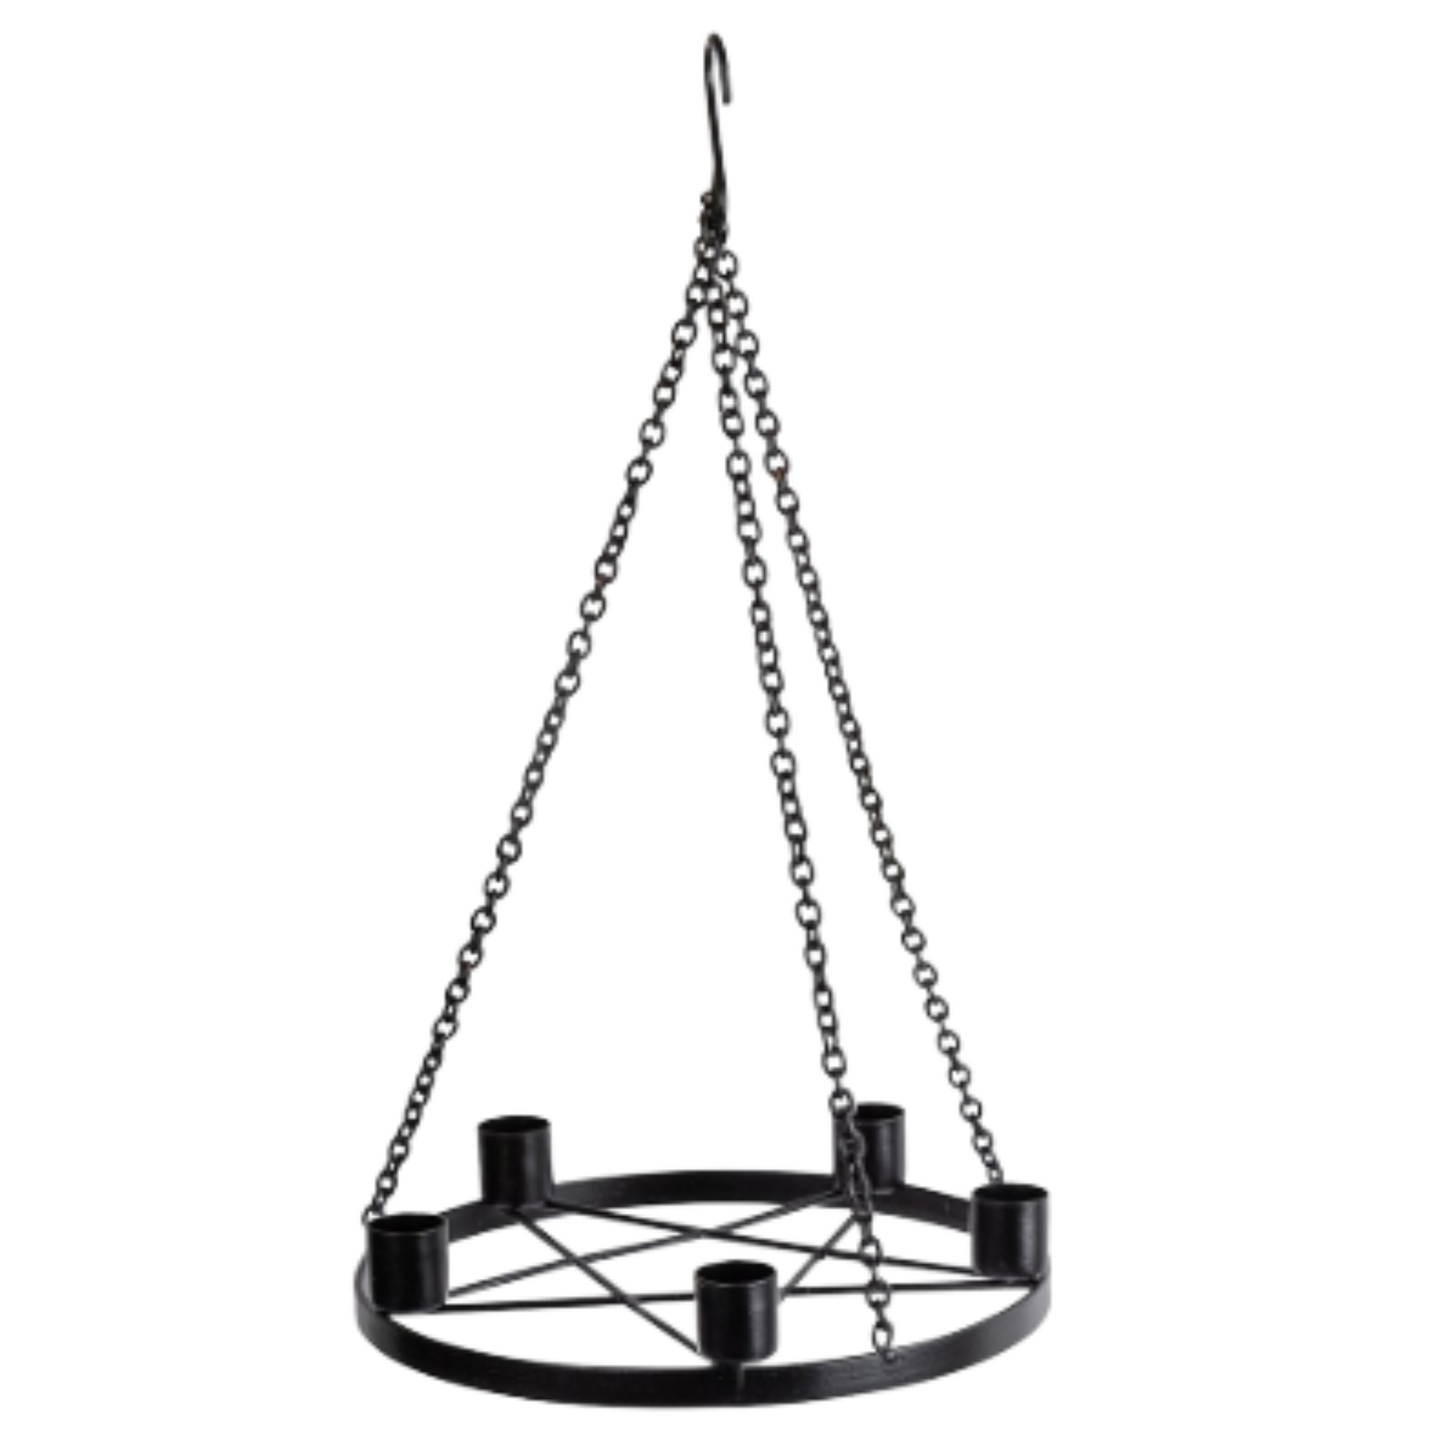 Pentacle Hanging Chain Candle Holder